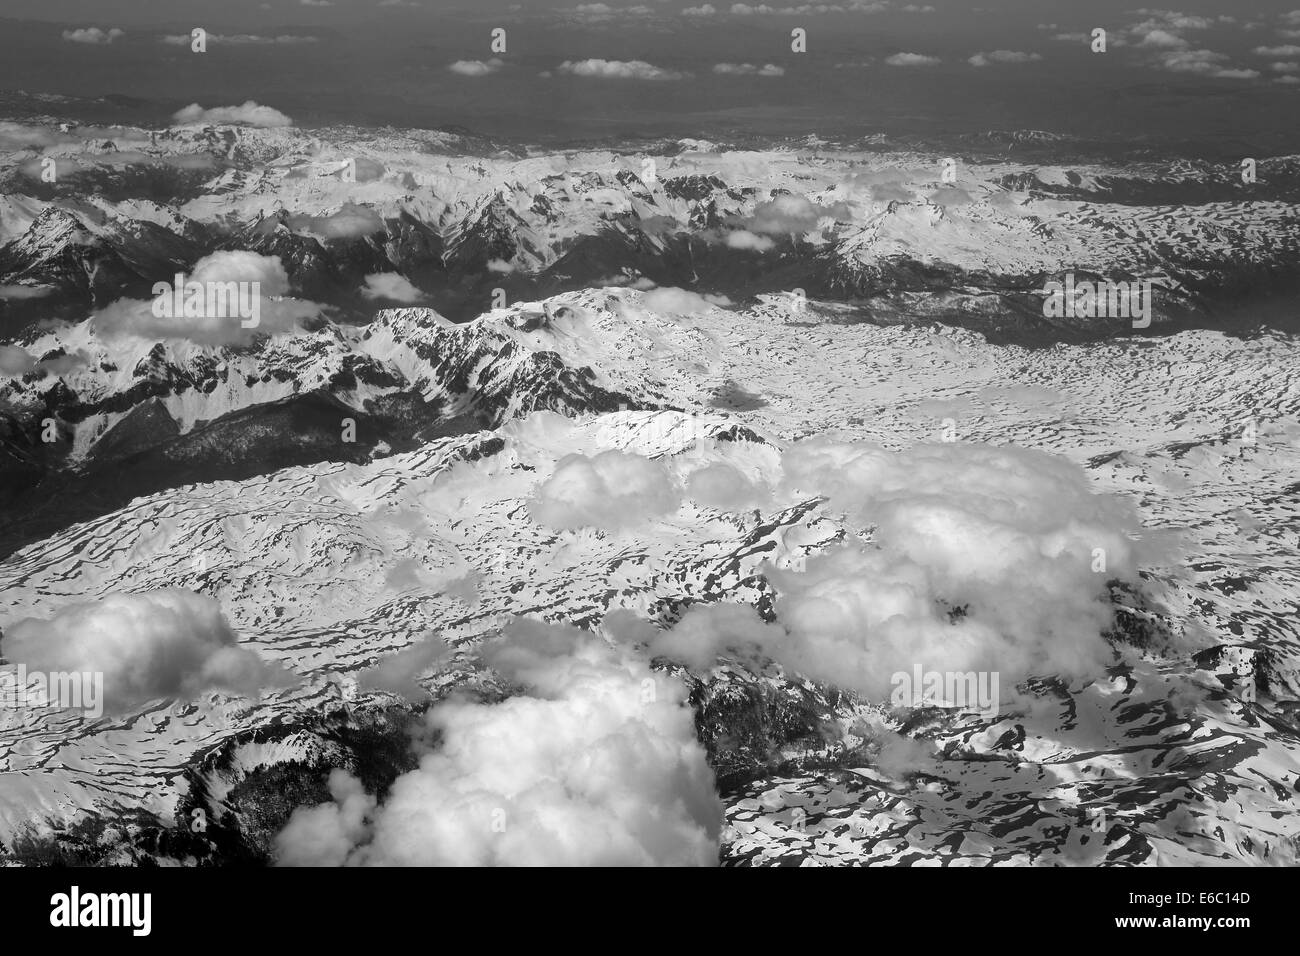 The view from the airplane window at the beautiful weather with clouds and mountains Stock Photo